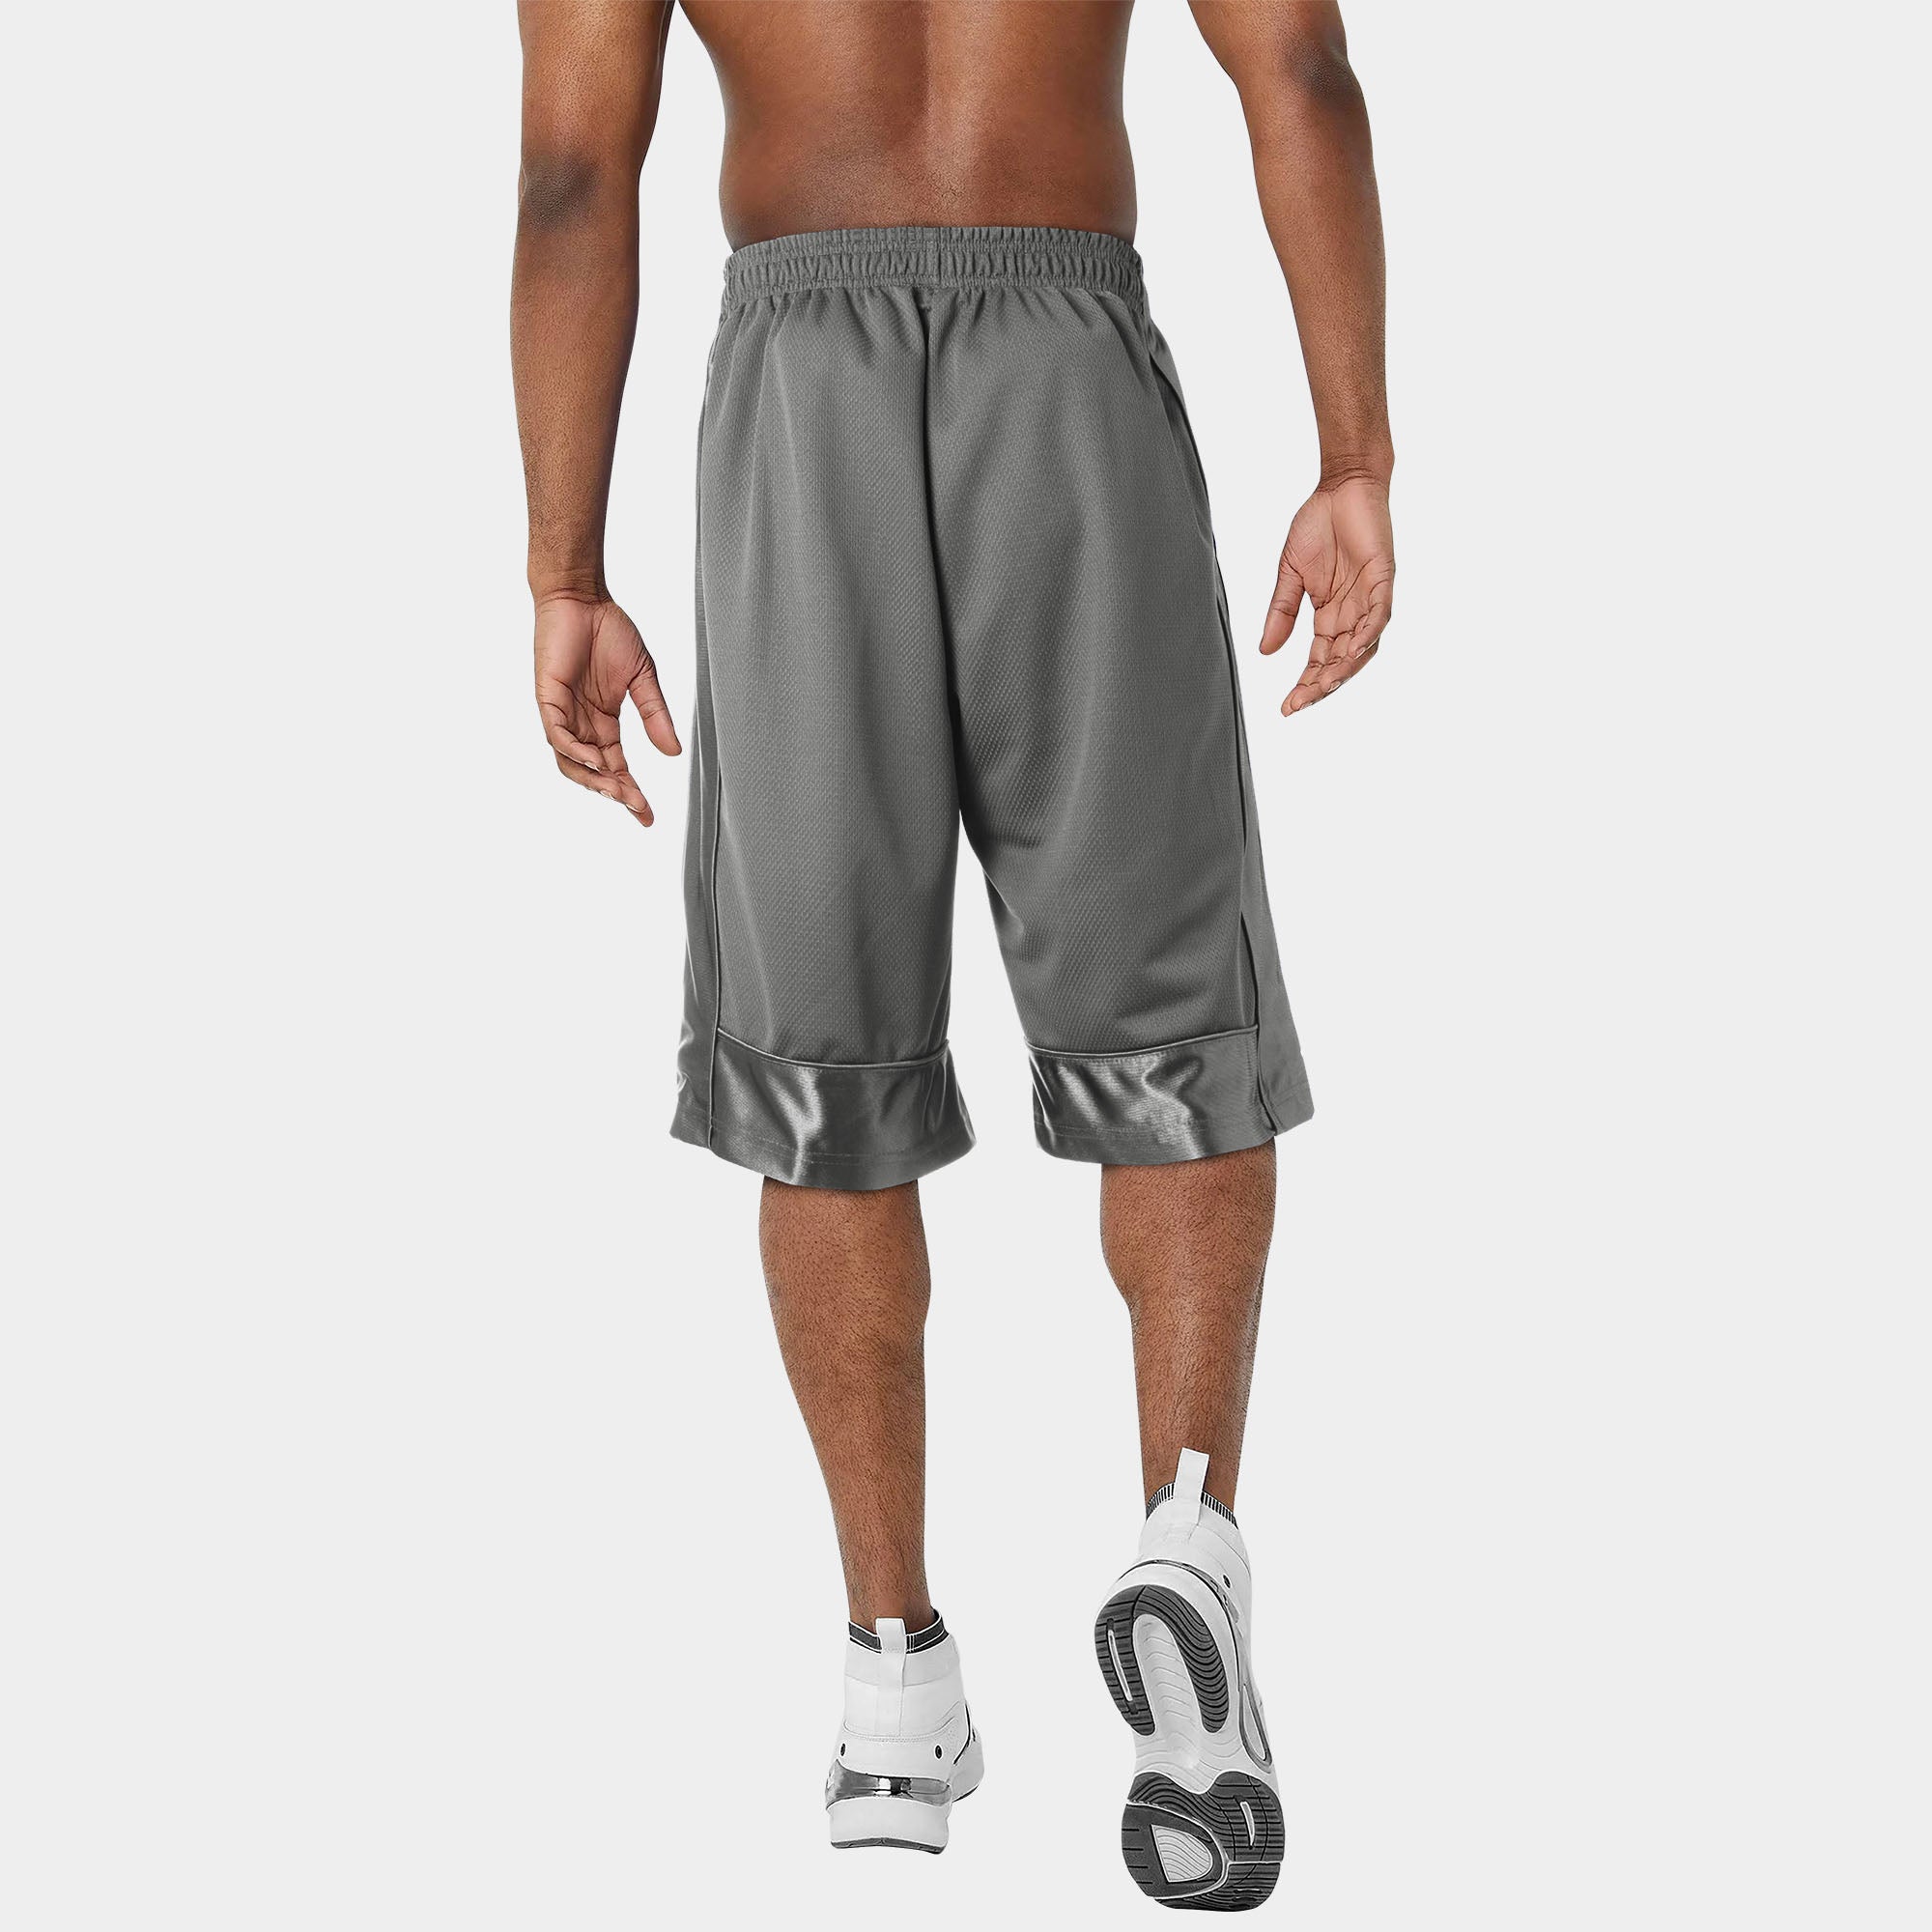 Mens Heavyweight Mesh Shorts with Pockets Basketball Gym Workout